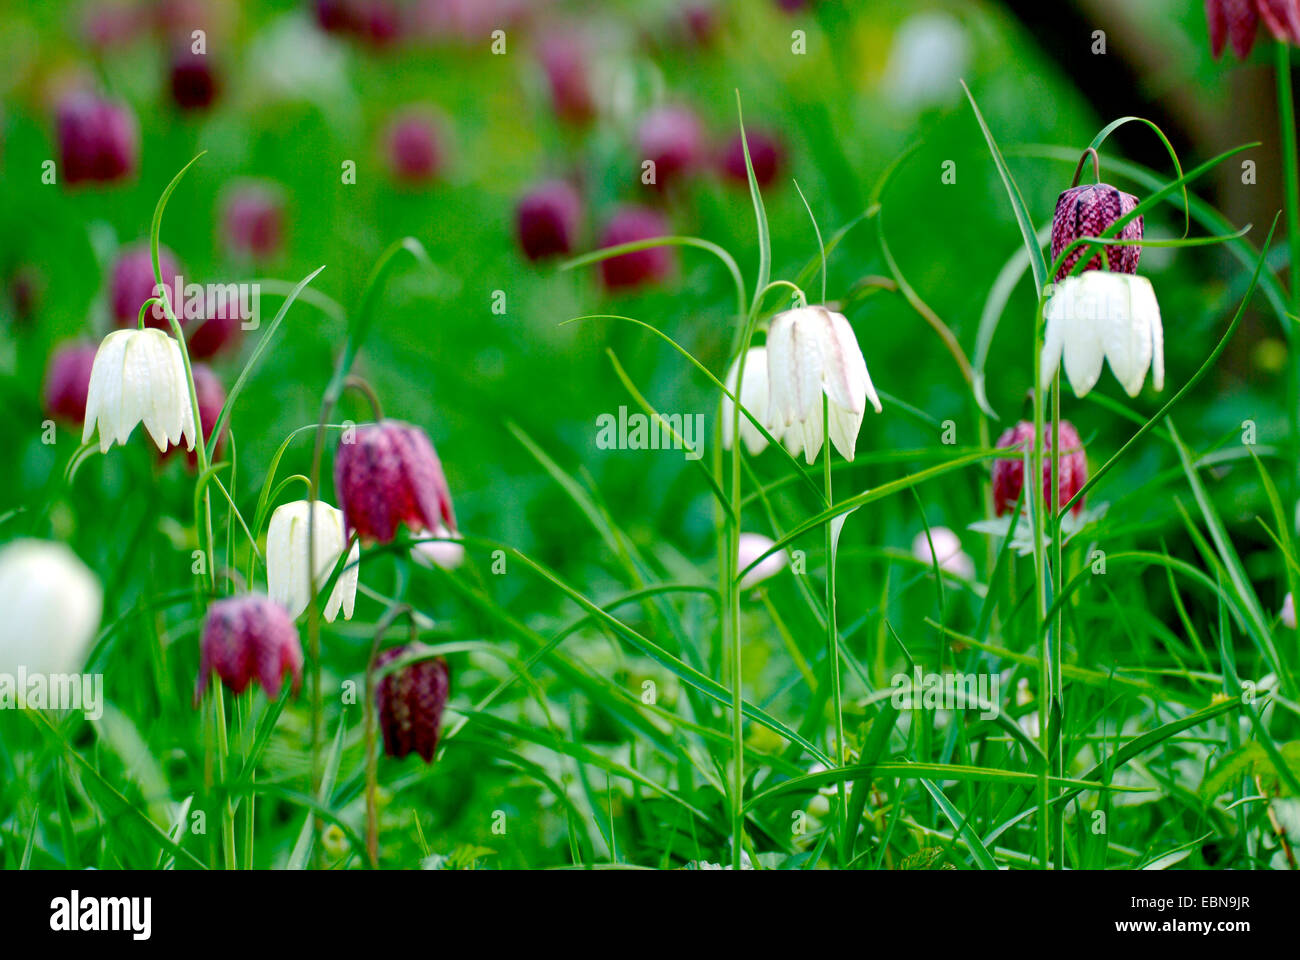 common fritillary, snake's-head fritillaria (Fritillaria meleagris), blooming in white and violet, Germany Stock Photo